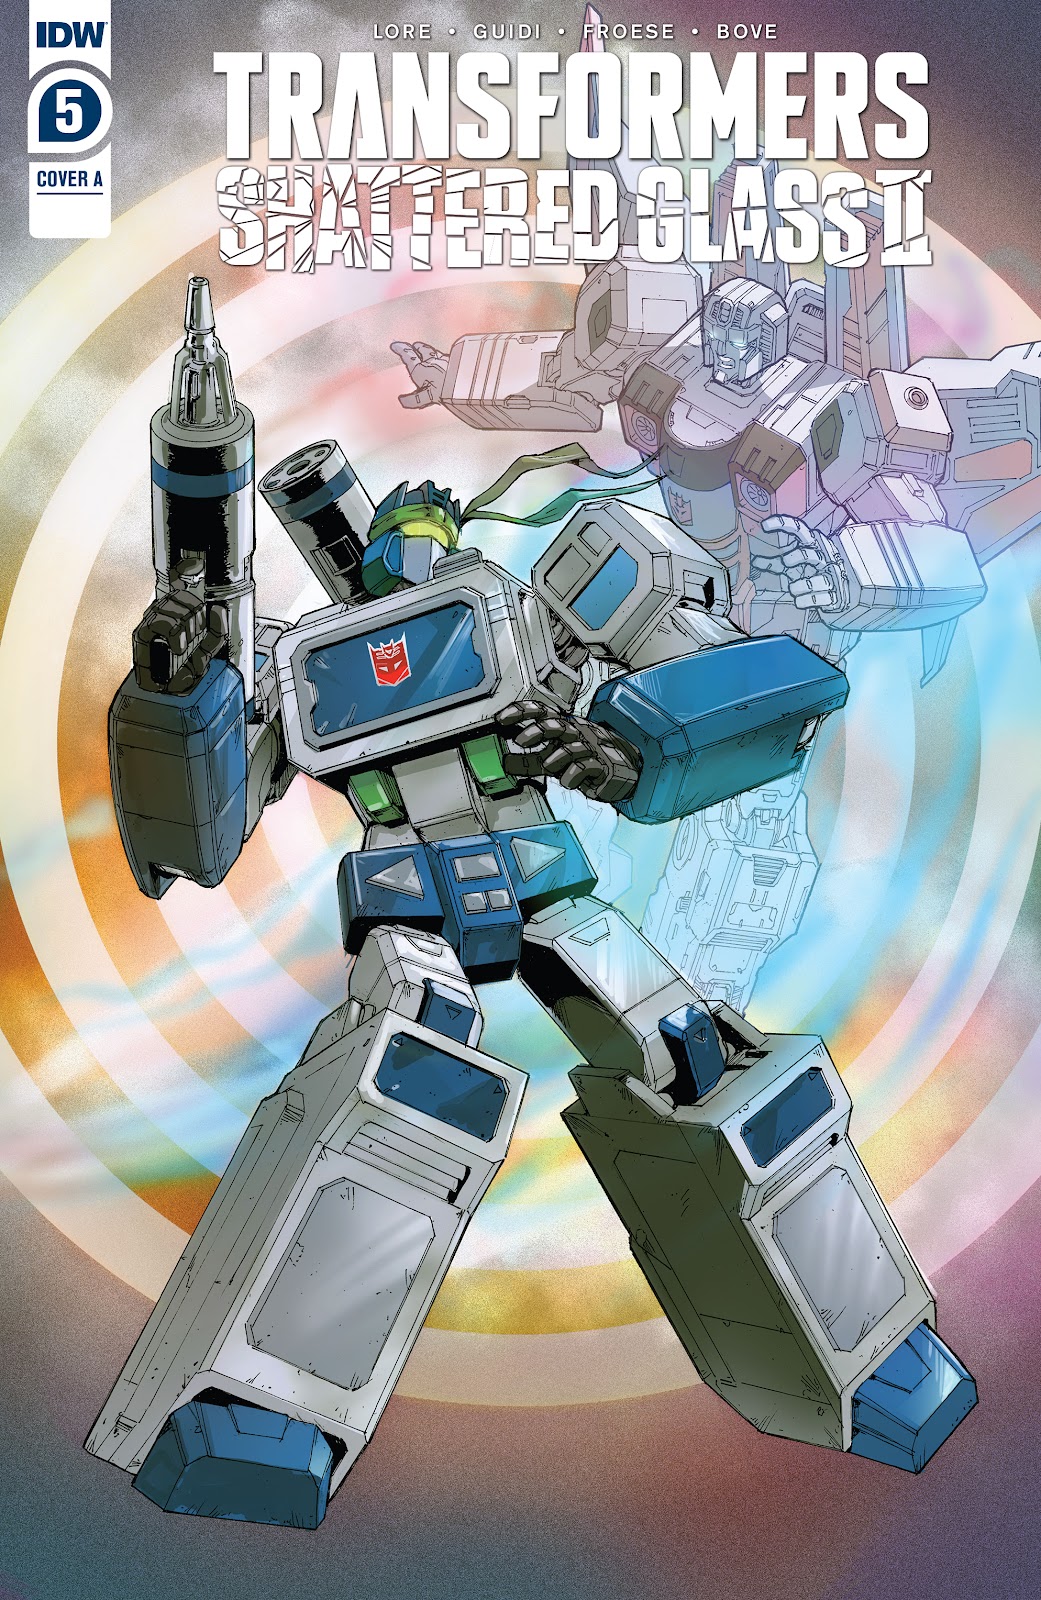 Transformers: Shattered Glass II issue 5 - Page 1